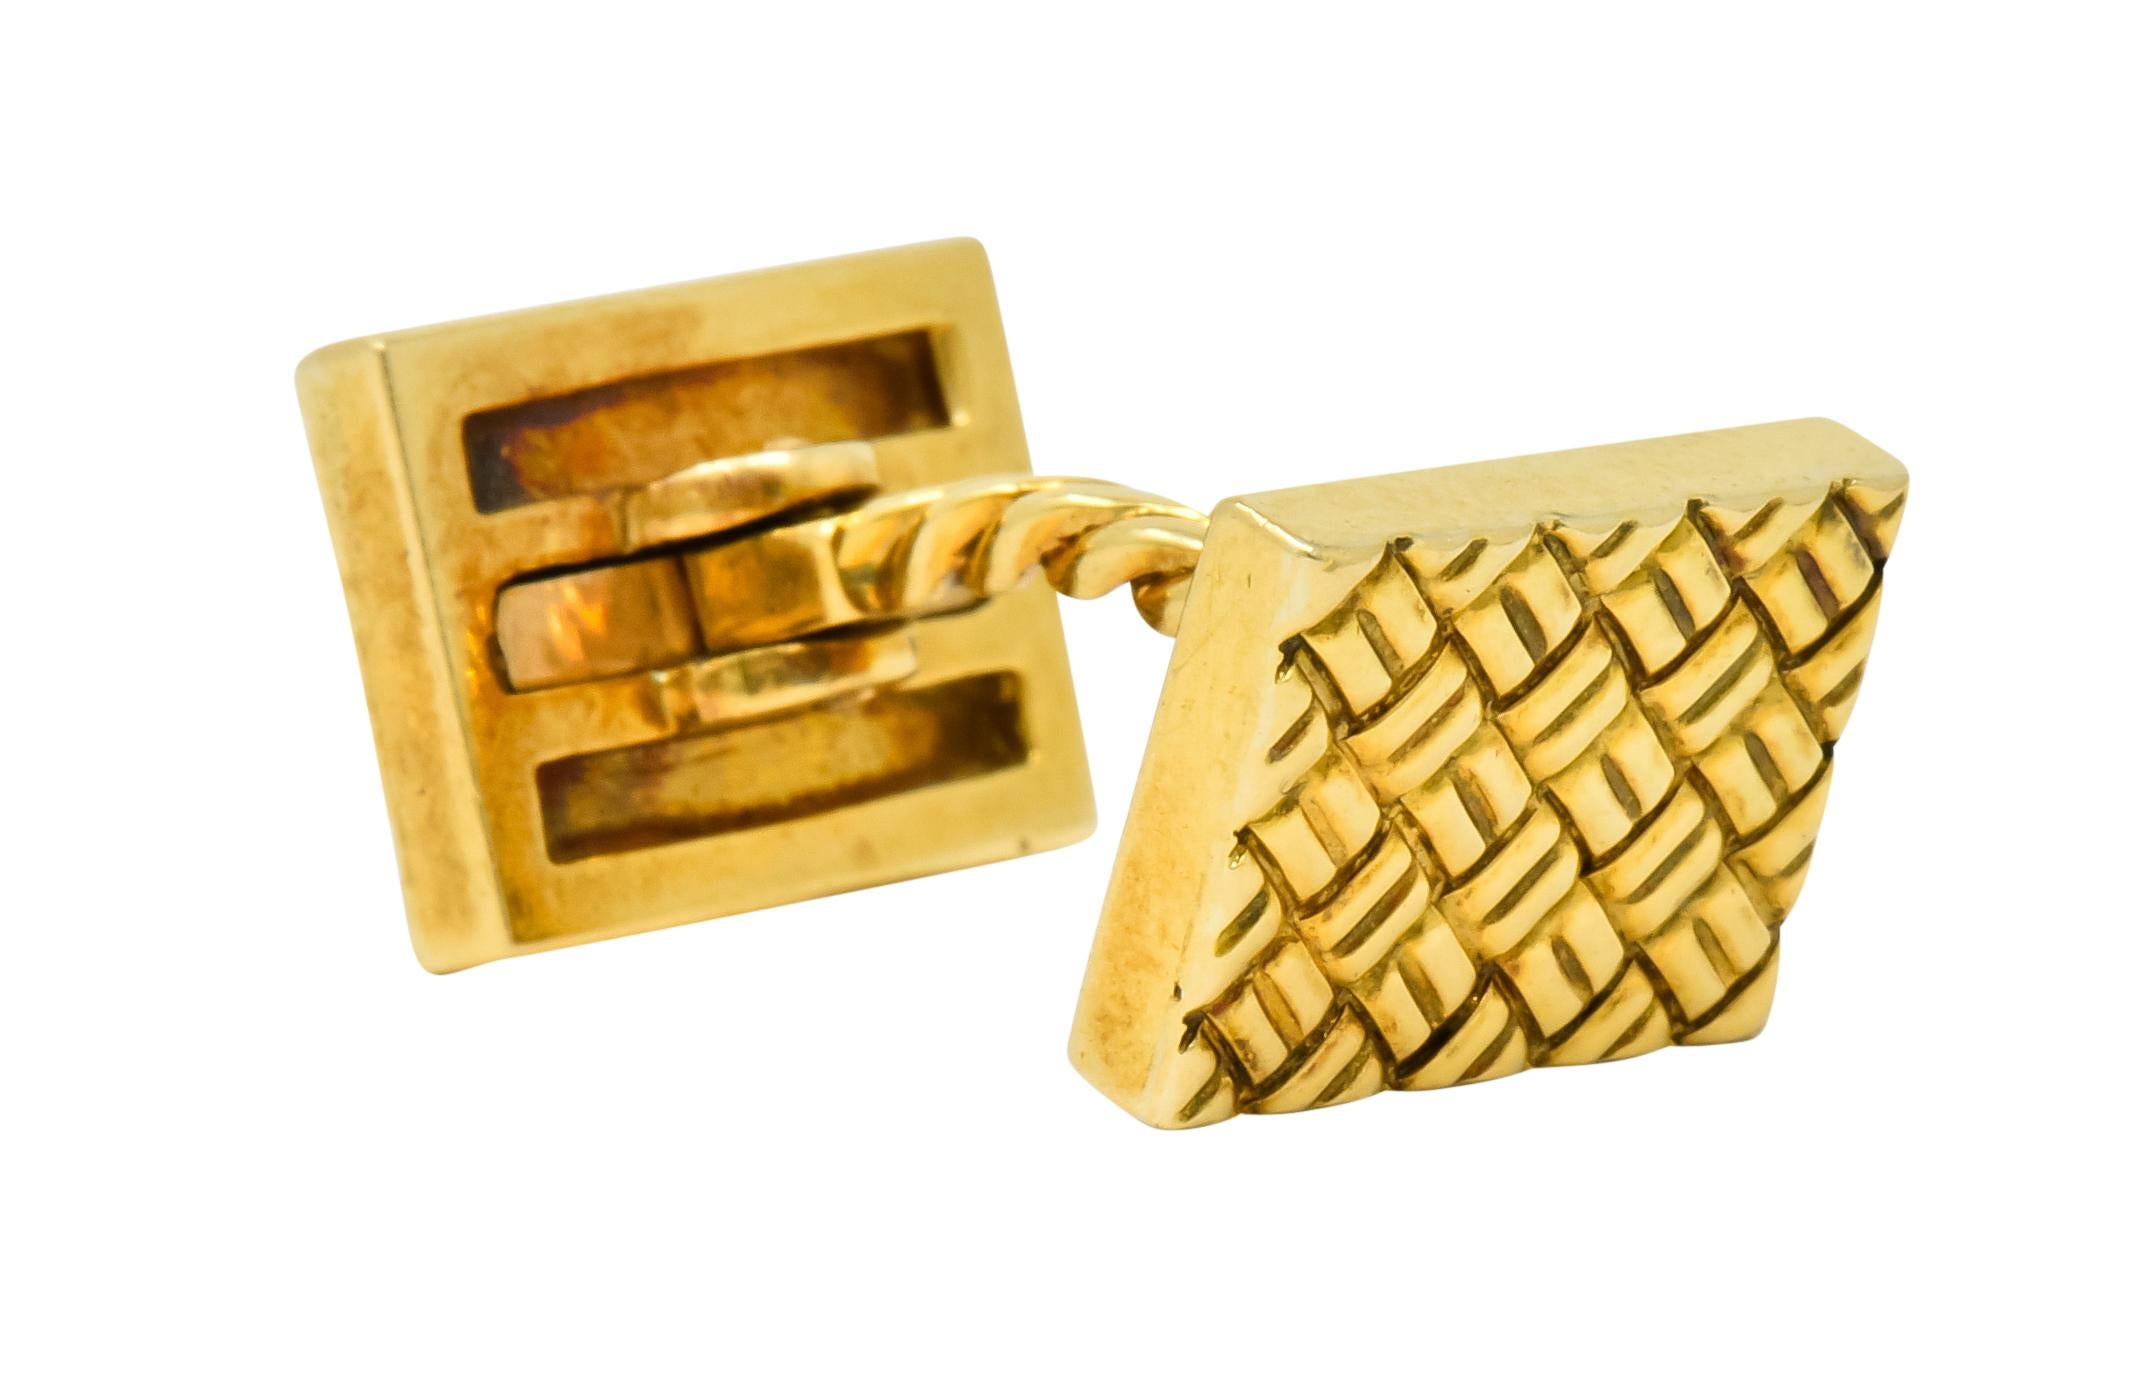 Lever style cufflinks terminating as two rectangles featuring a deeply engraved woven motif

With a twisted cable bar center

One cufflink signed VCA NY for Van Cleef & Arpels New York and numbered

Both stamped 18k for 18 karat gold

Length: 1